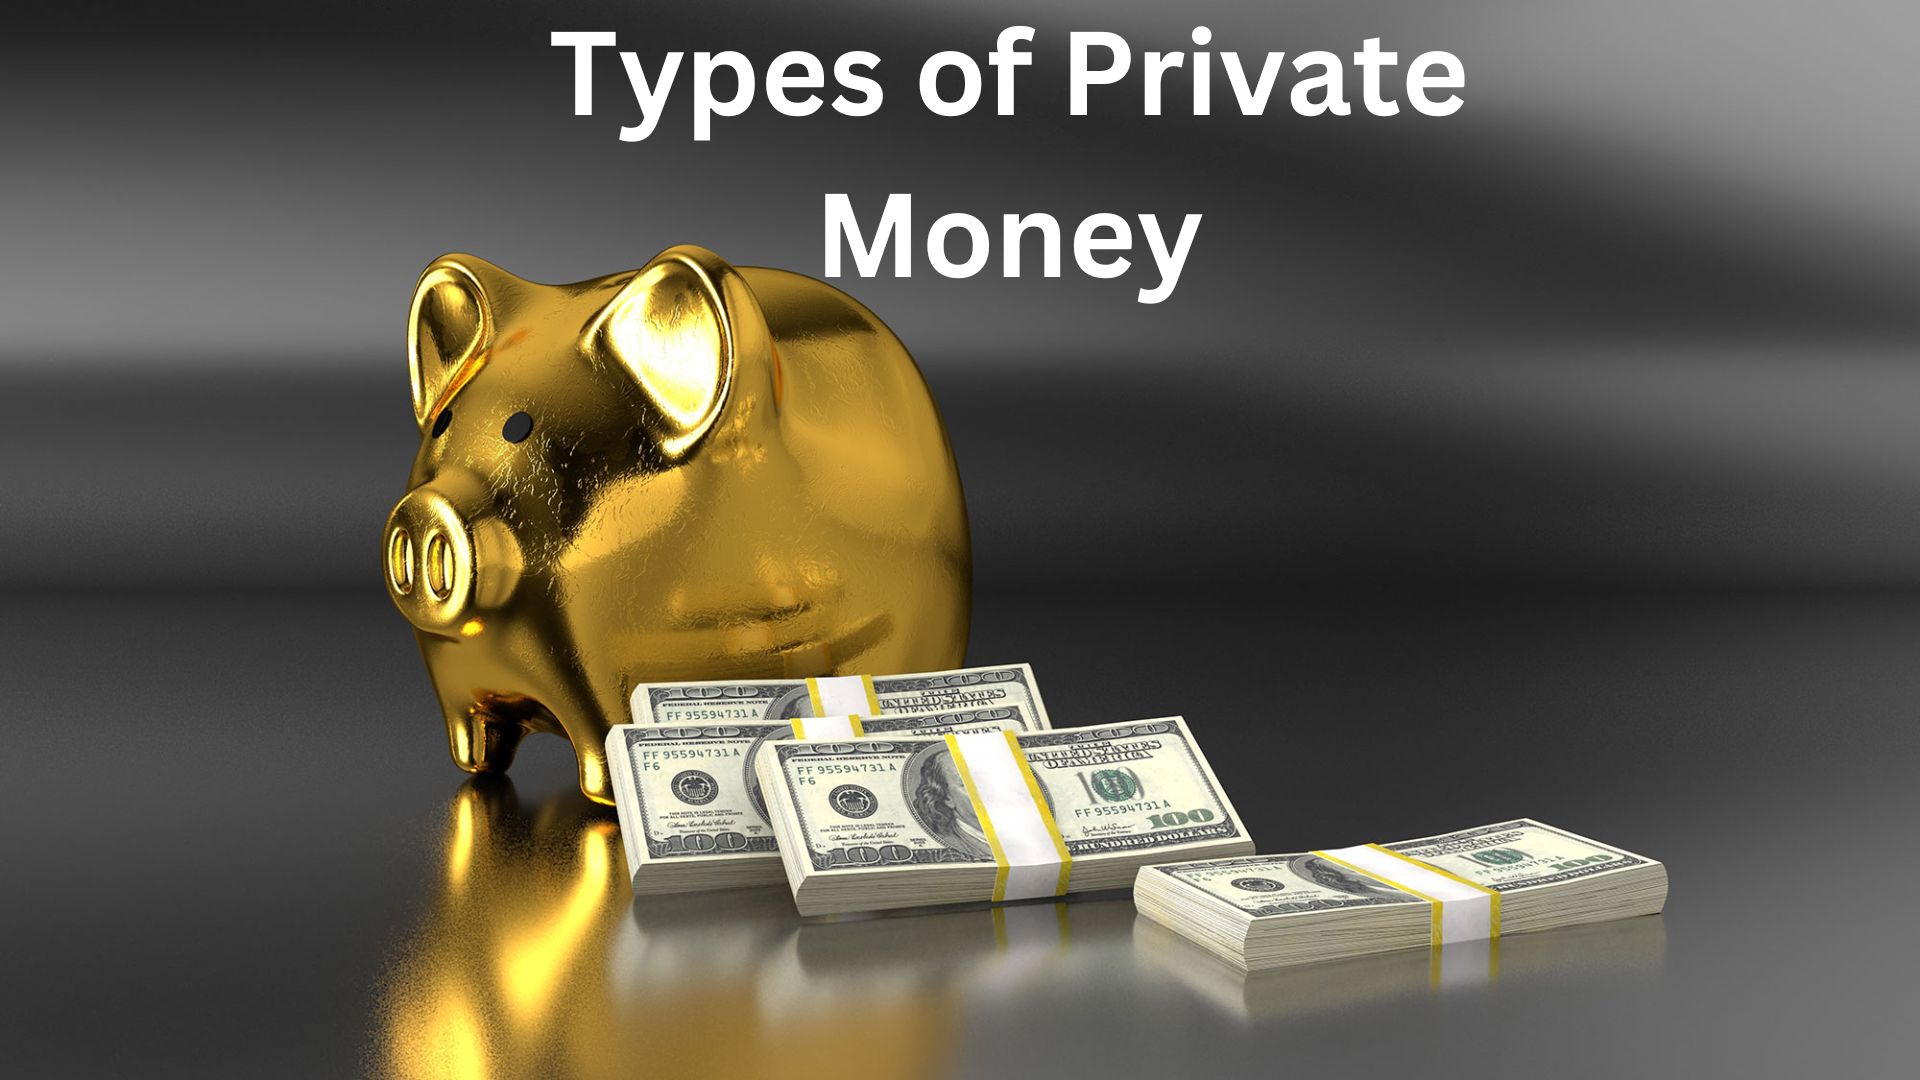 Types of Private Money